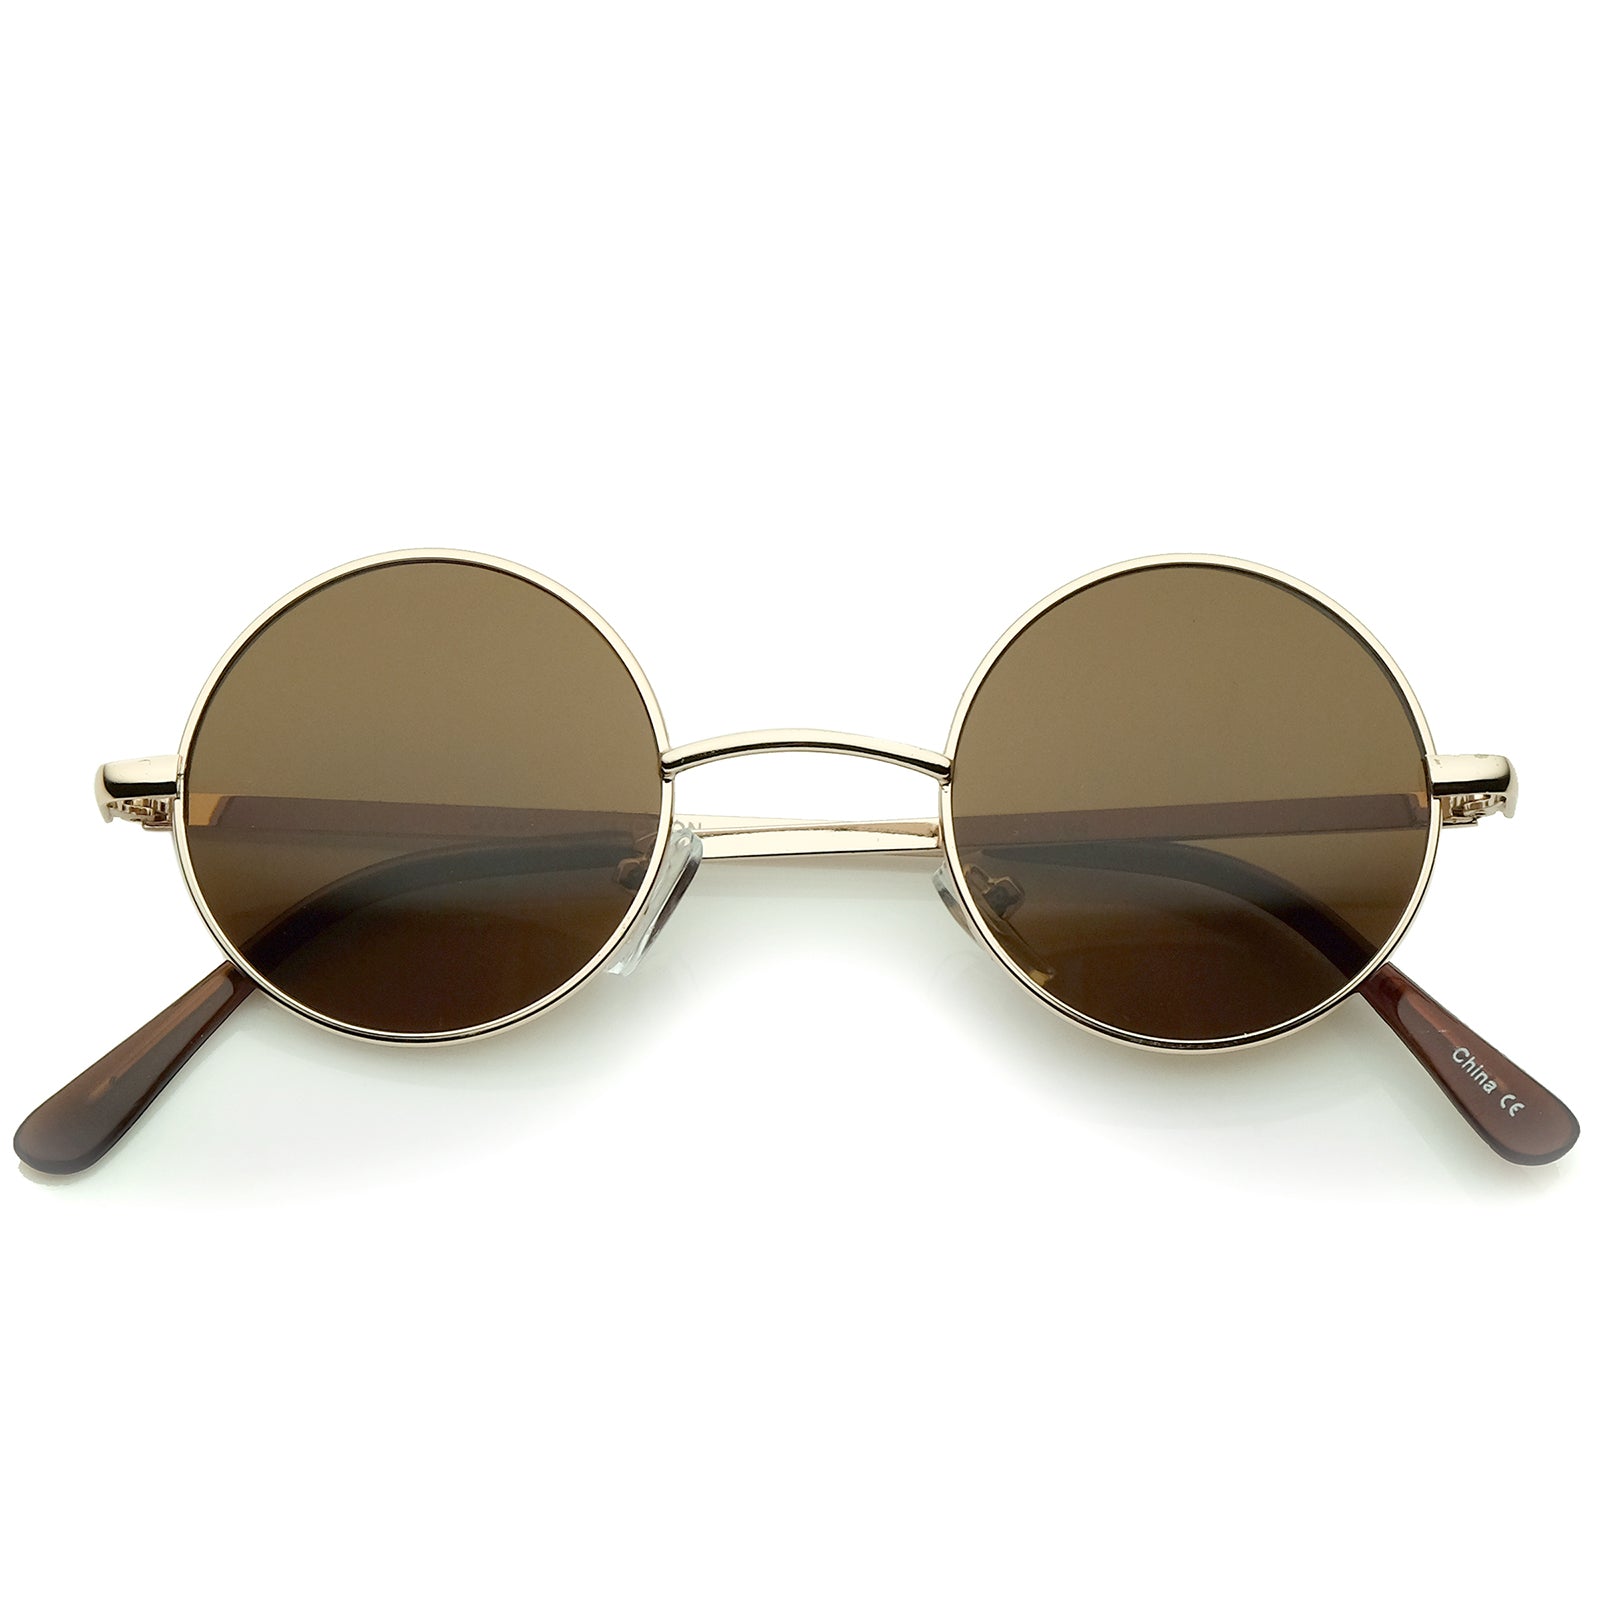 Small Retro Lennon Inspired Style Neutral-Colored Lens Round Metal Sunglasses 41mm, Gold / Brown